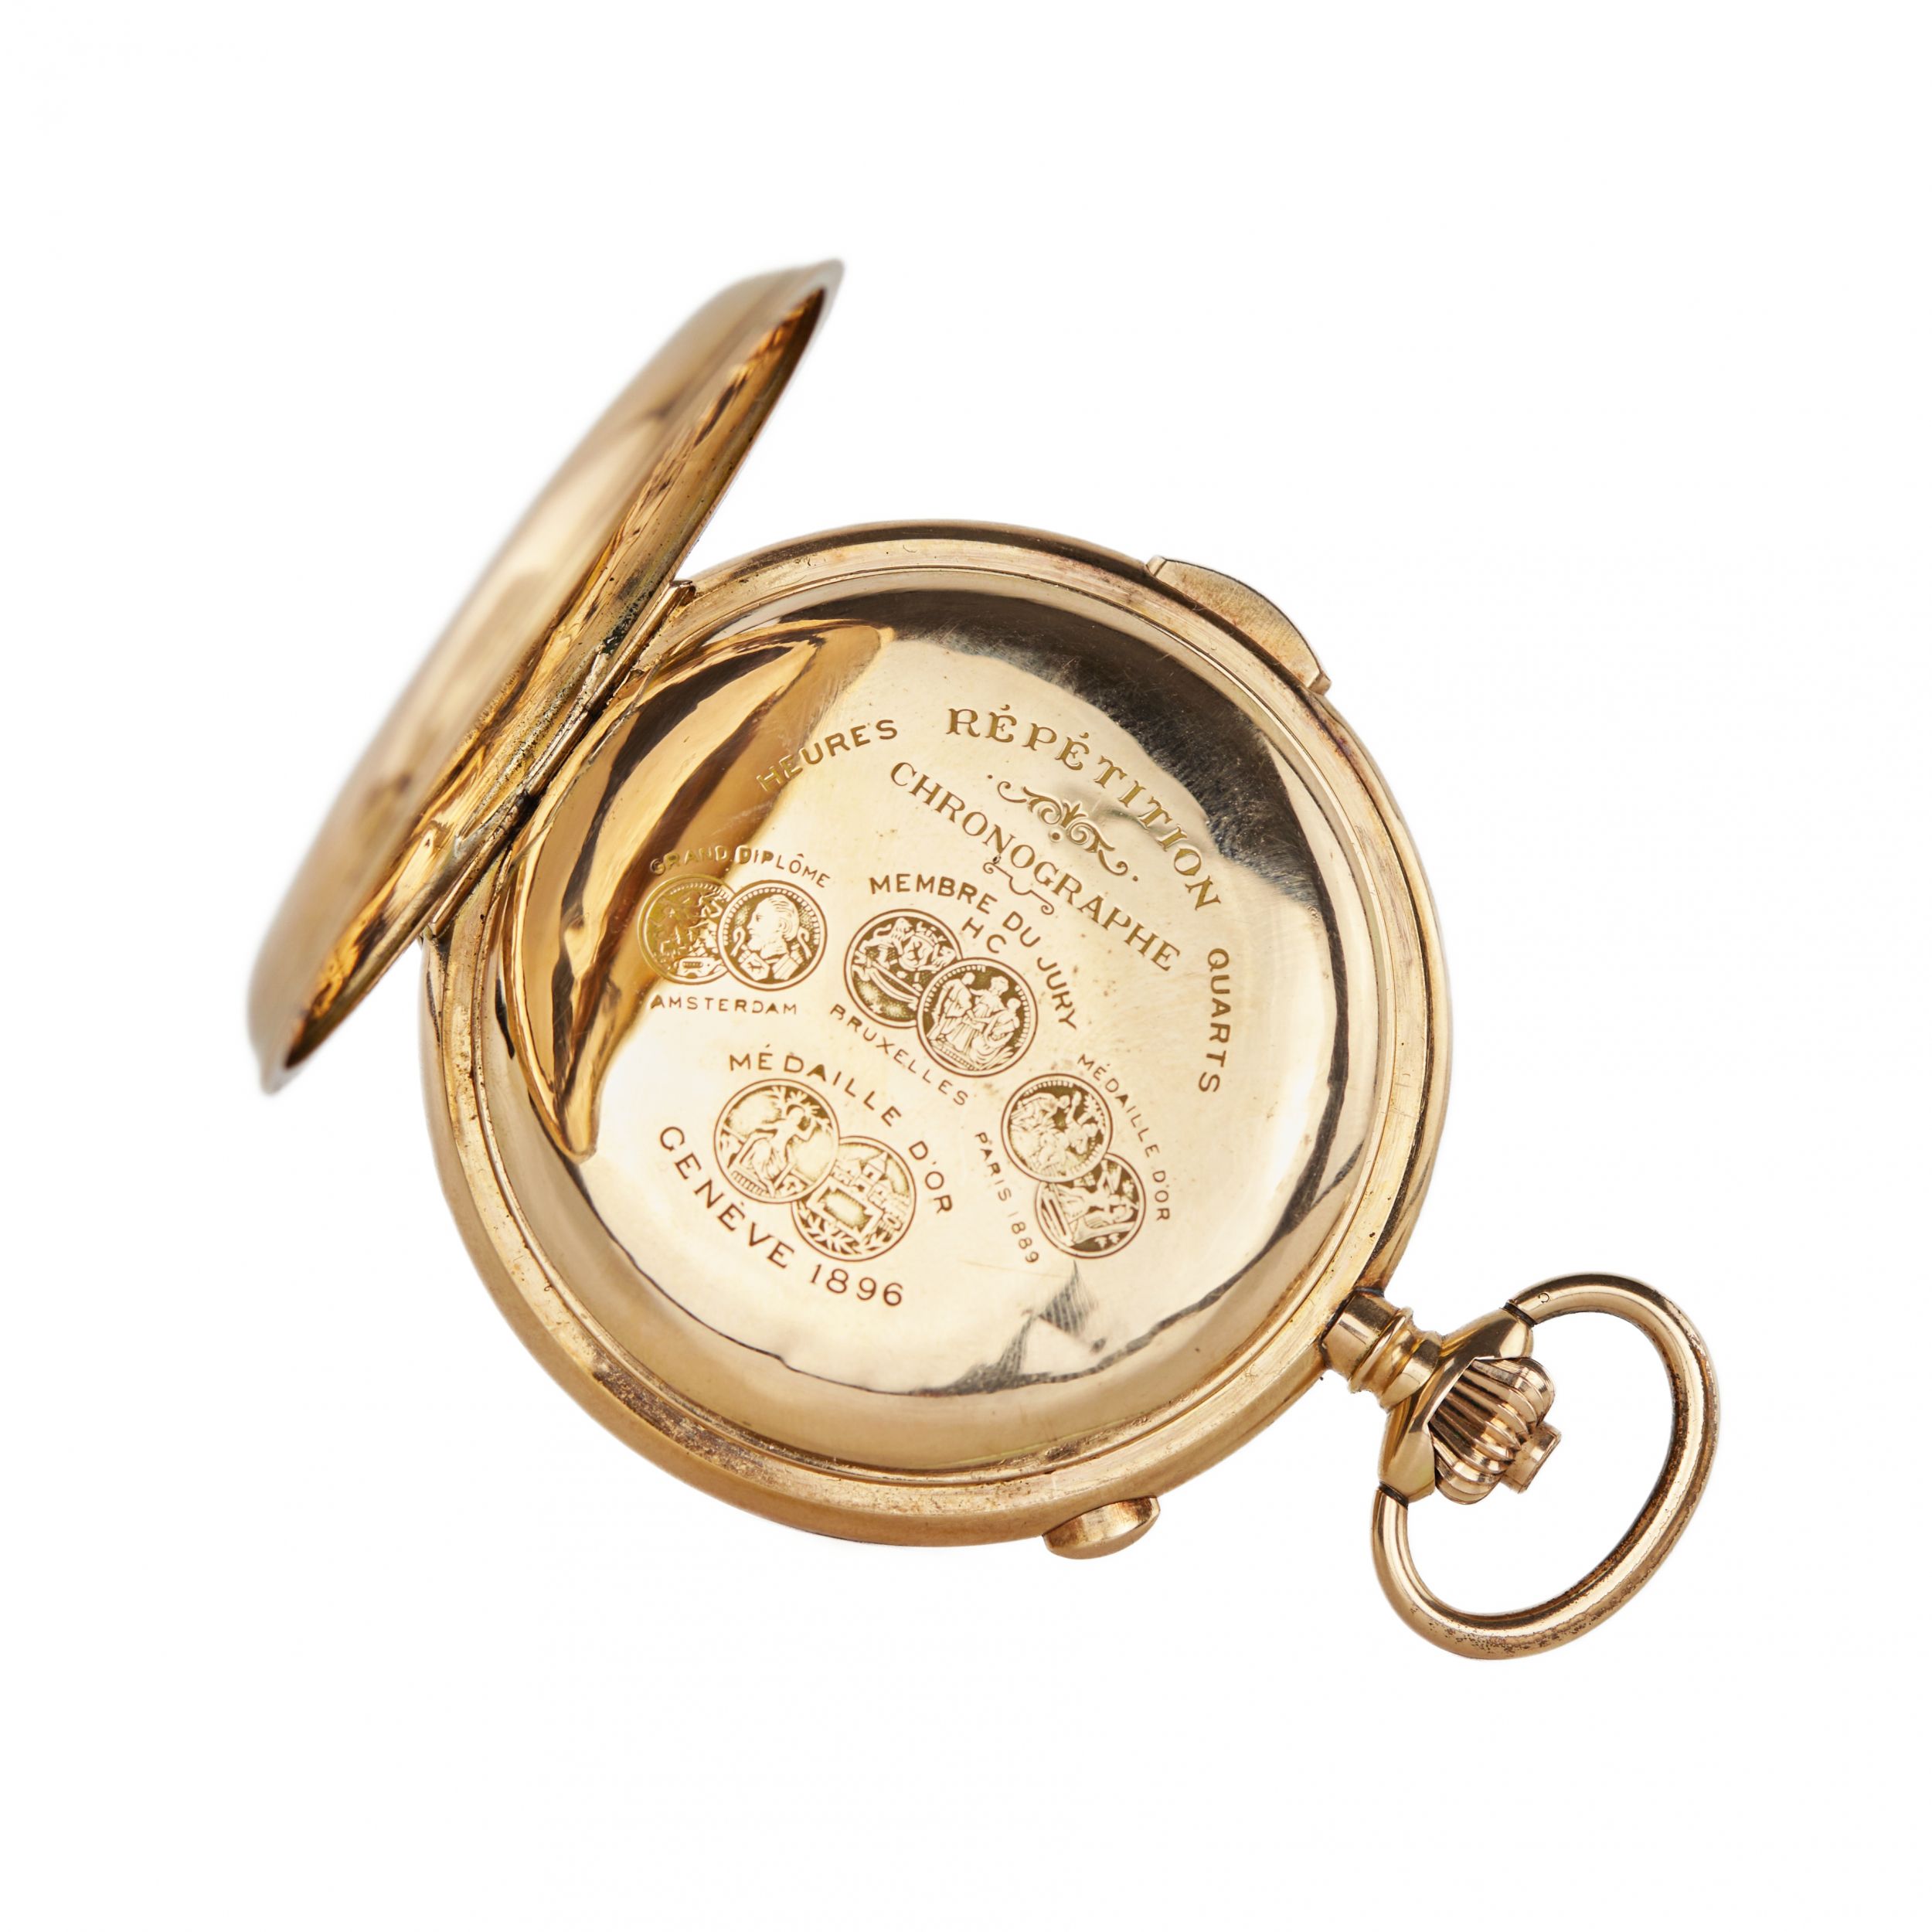 Heures Repetition Quarts Taschenuhr Chronographe 14k Gold Pocket Watch - Image 6 of 11